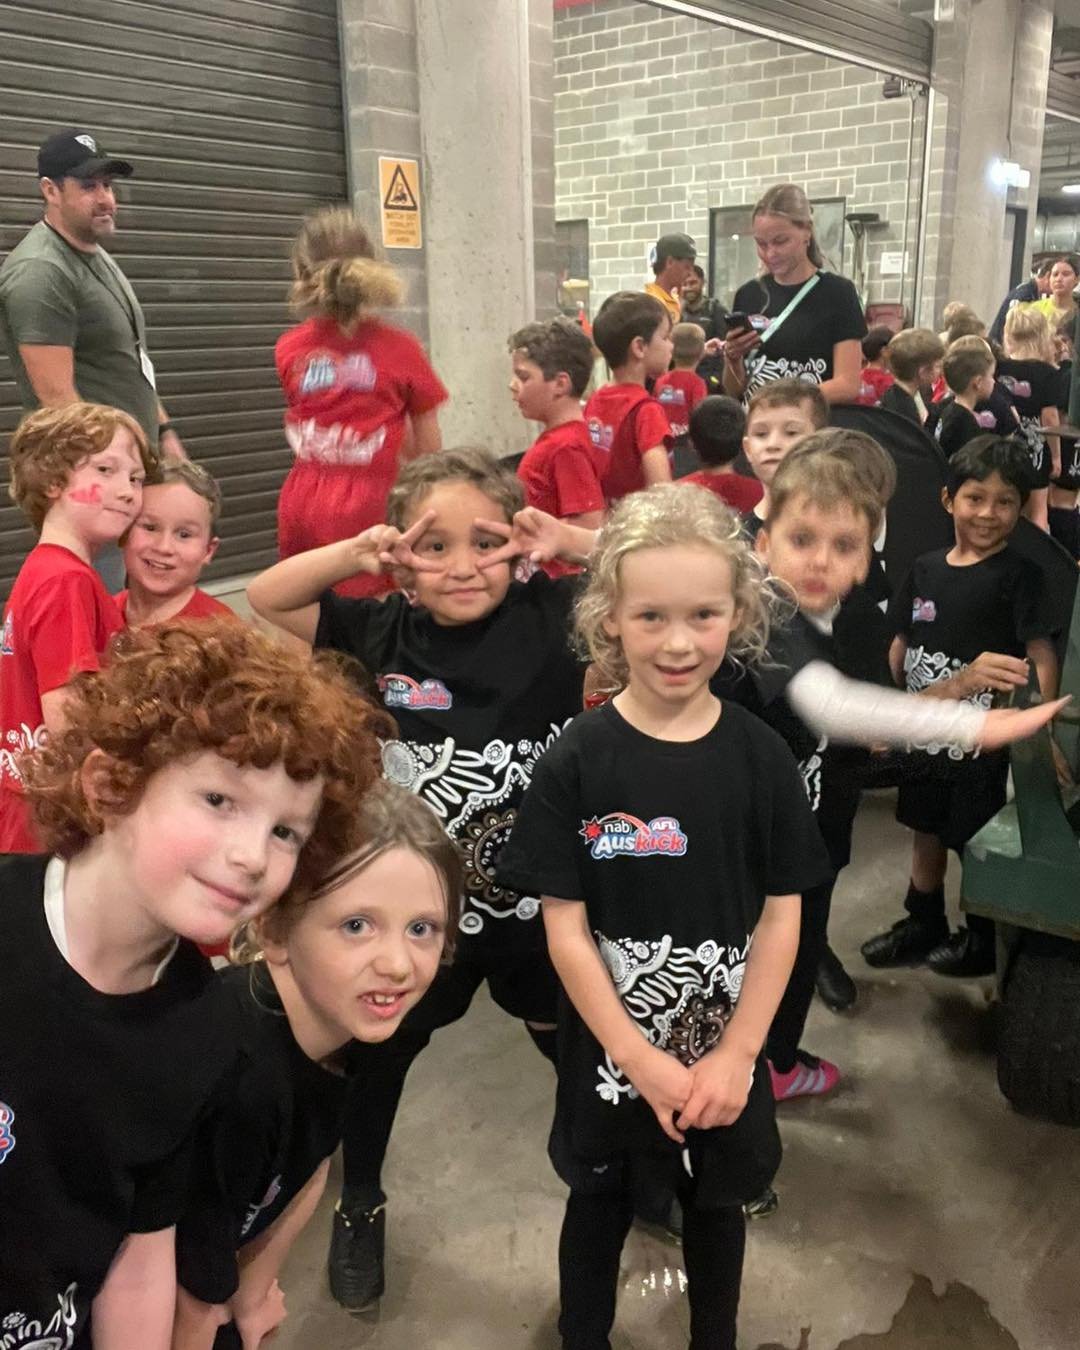 Some of our little Magpies waiting behind the scenes before half time Auskick at the SCG last night. 

Playing on the same ground as your footy heros in front of a massive crowd is all part of the Auskick experience at Wests Juniors. 

The seasons ju